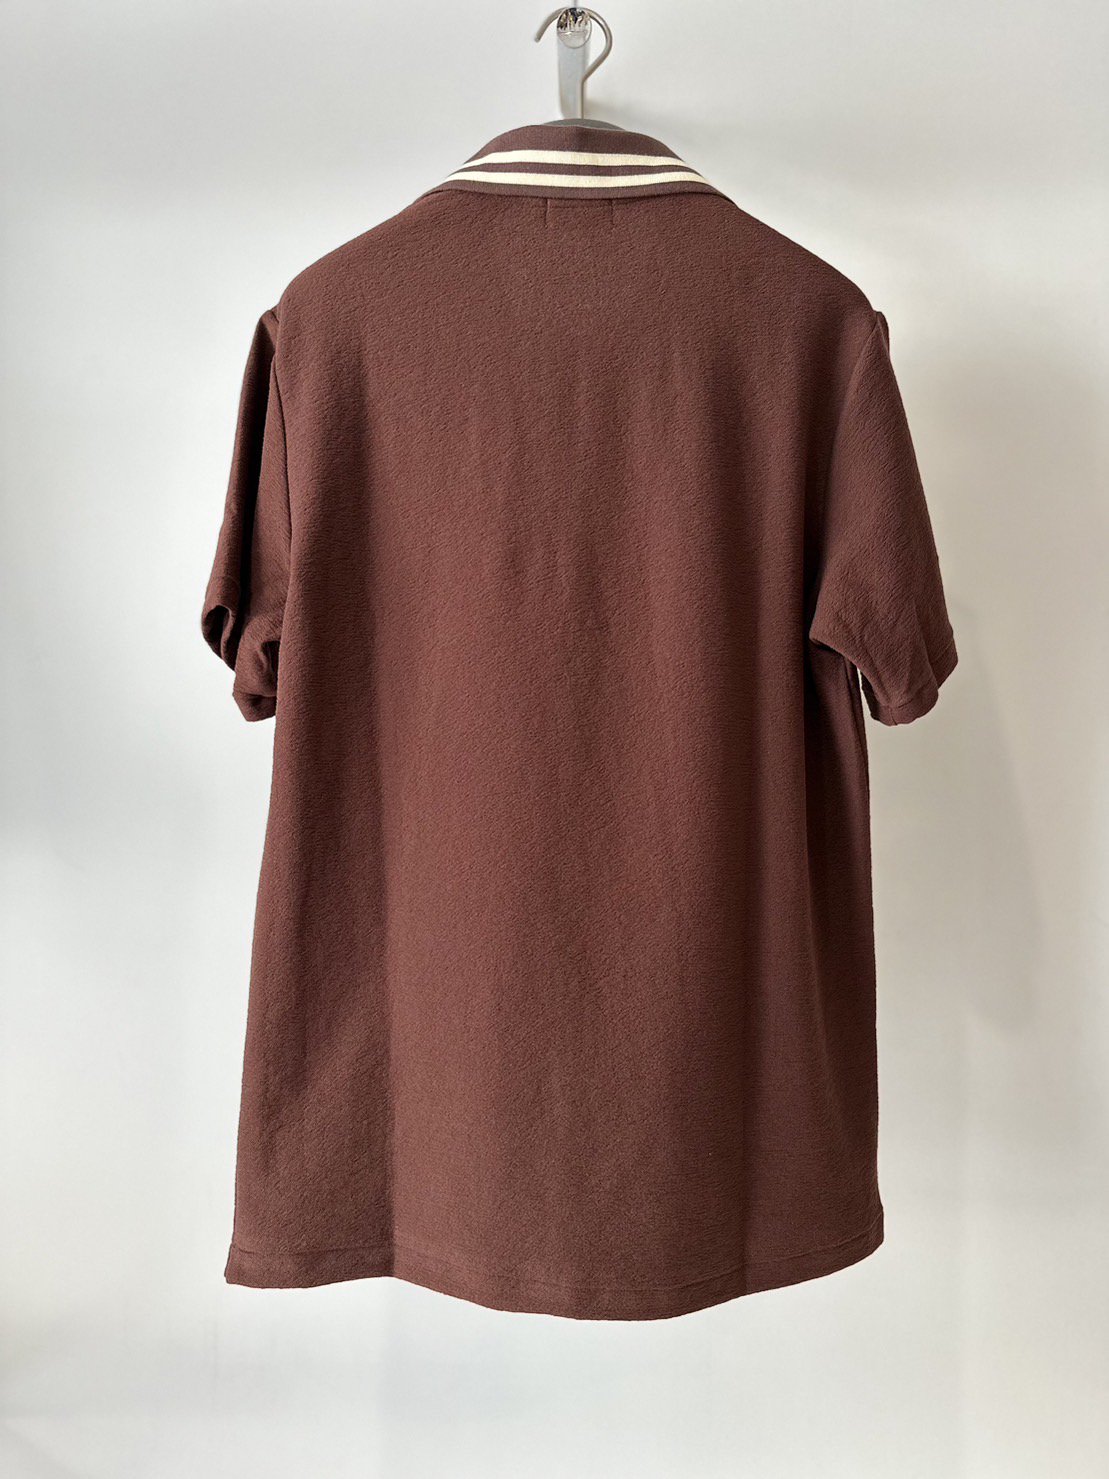 LITTLEBIG<br />S/S Lace-Up Polo SH / Brown<img class='new_mark_img2' src='https://img.shop-pro.jp/img/new/icons14.gif' style='border:none;display:inline;margin:0px;padding:0px;width:auto;' />